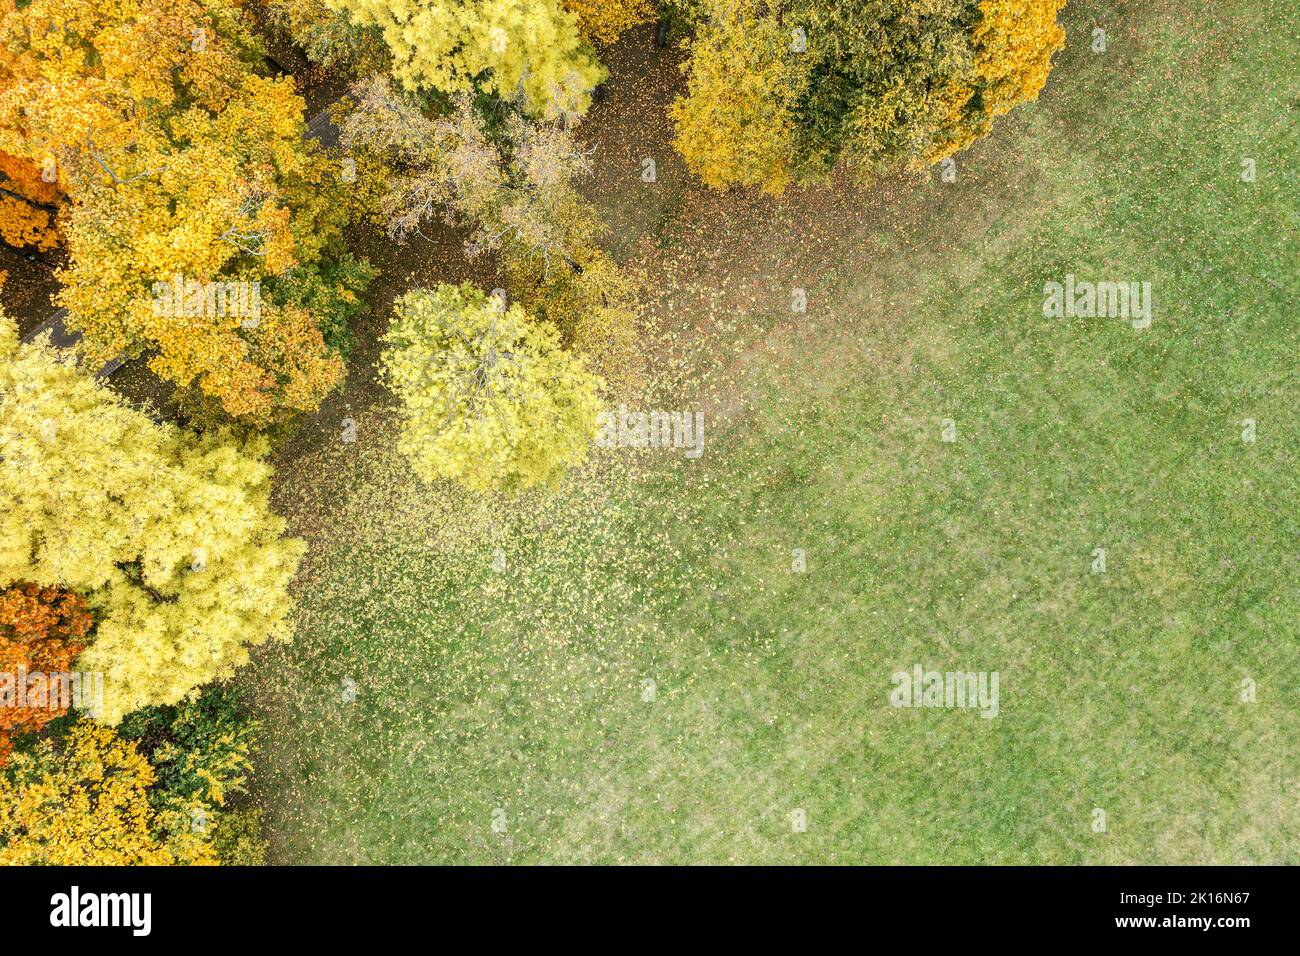 yellow trees in autumn park. green lawn covered by fallen leaves. aerial photography with drone. Stock Photo